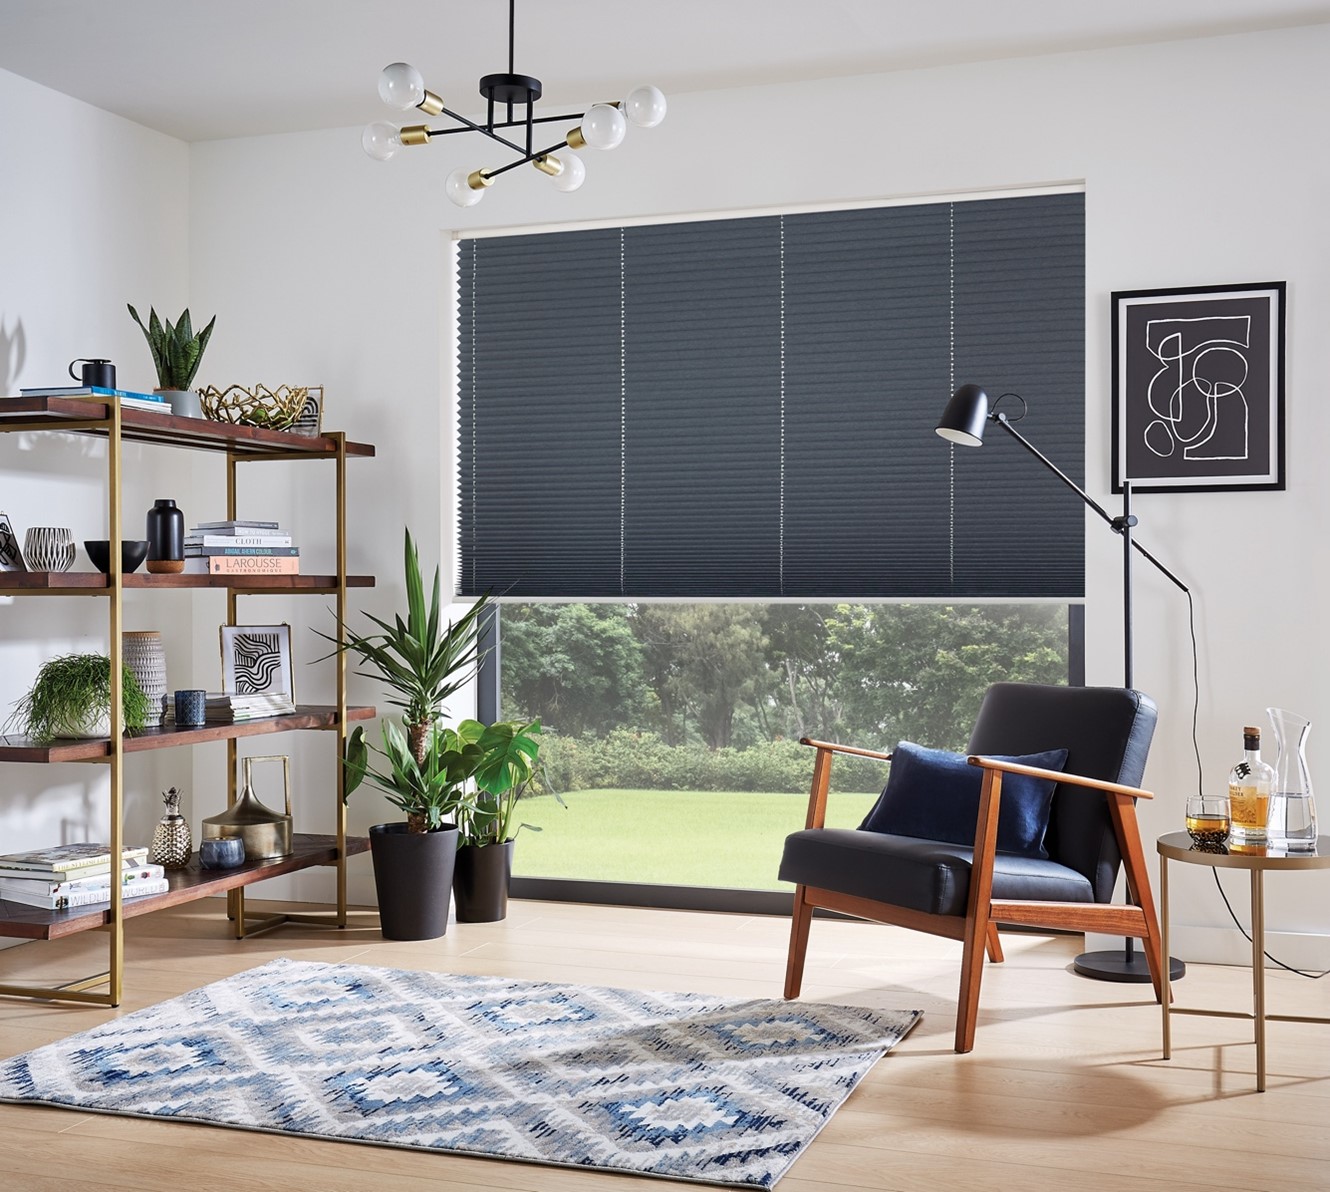 High performance pleated blinds